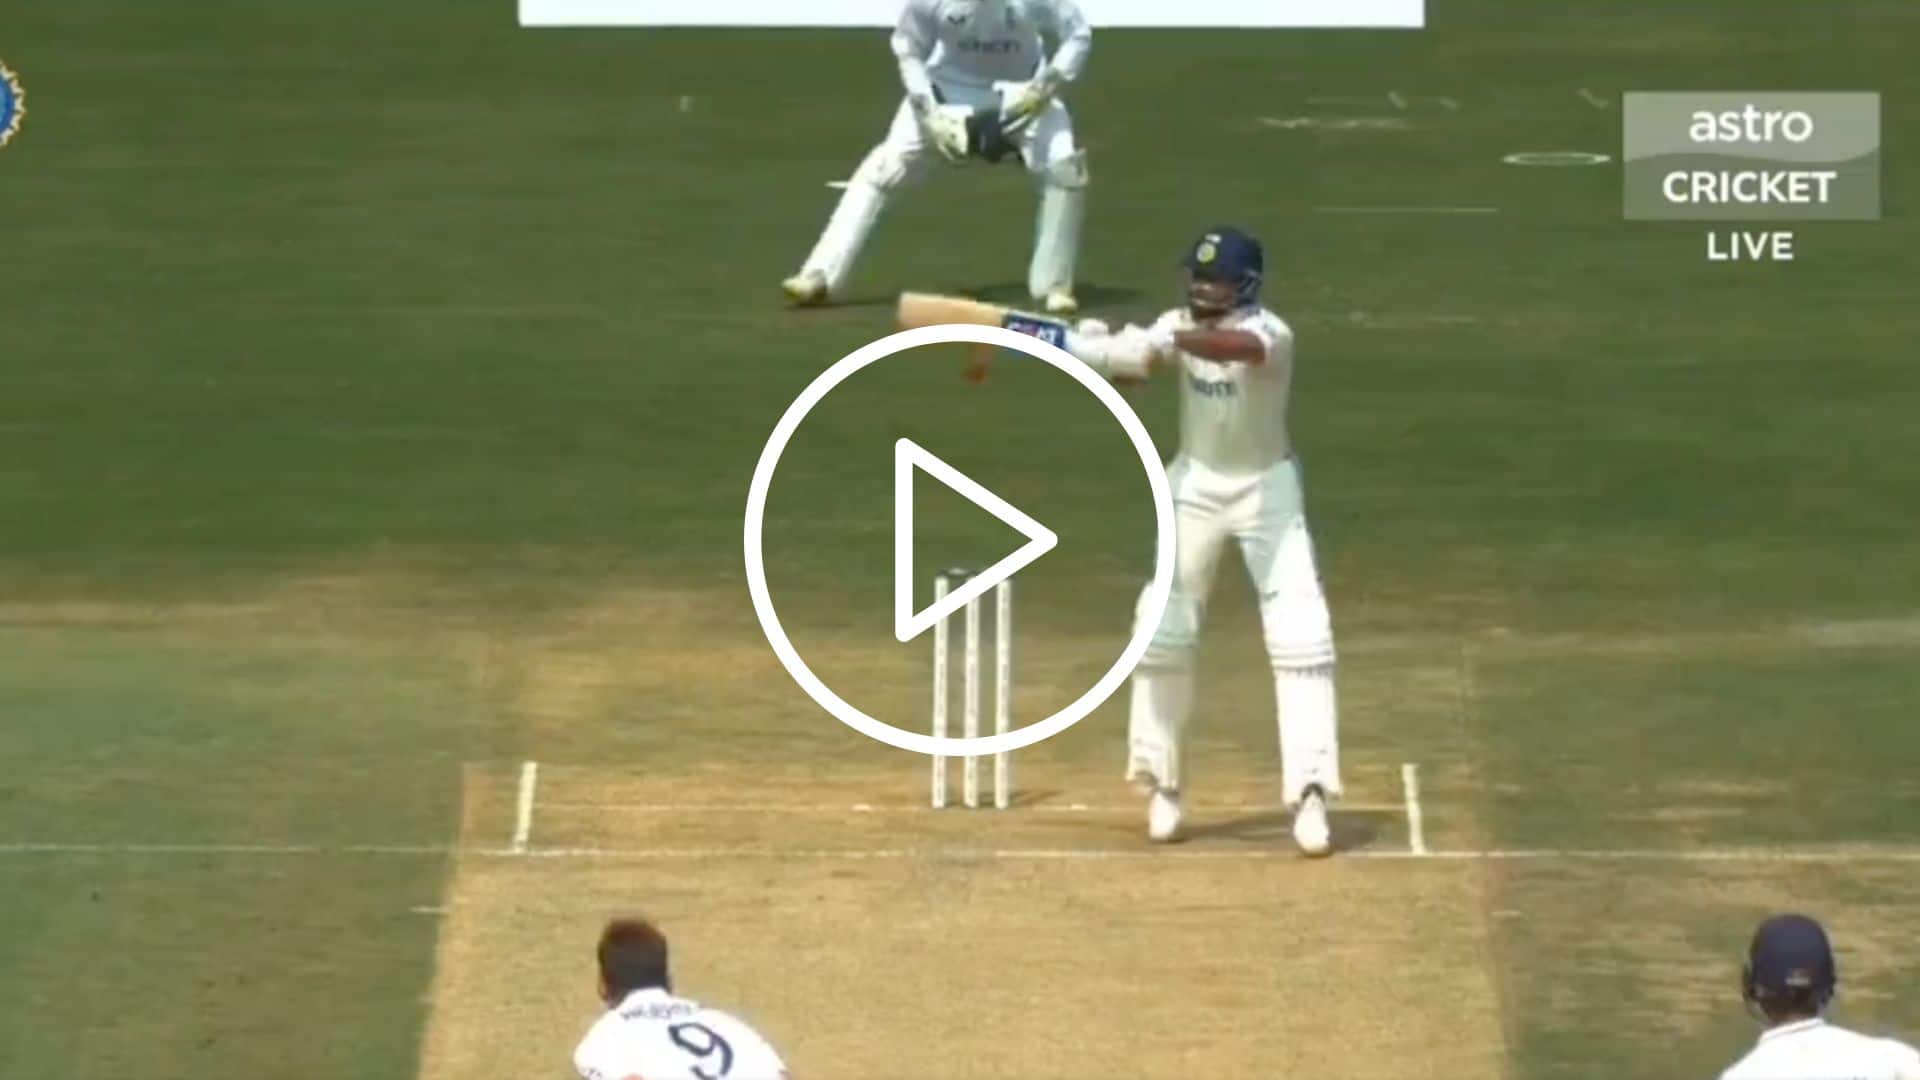 [Watch] Shreyas Iyer Survives A Scare As James Anderson Exploit Short-Ball Weakness